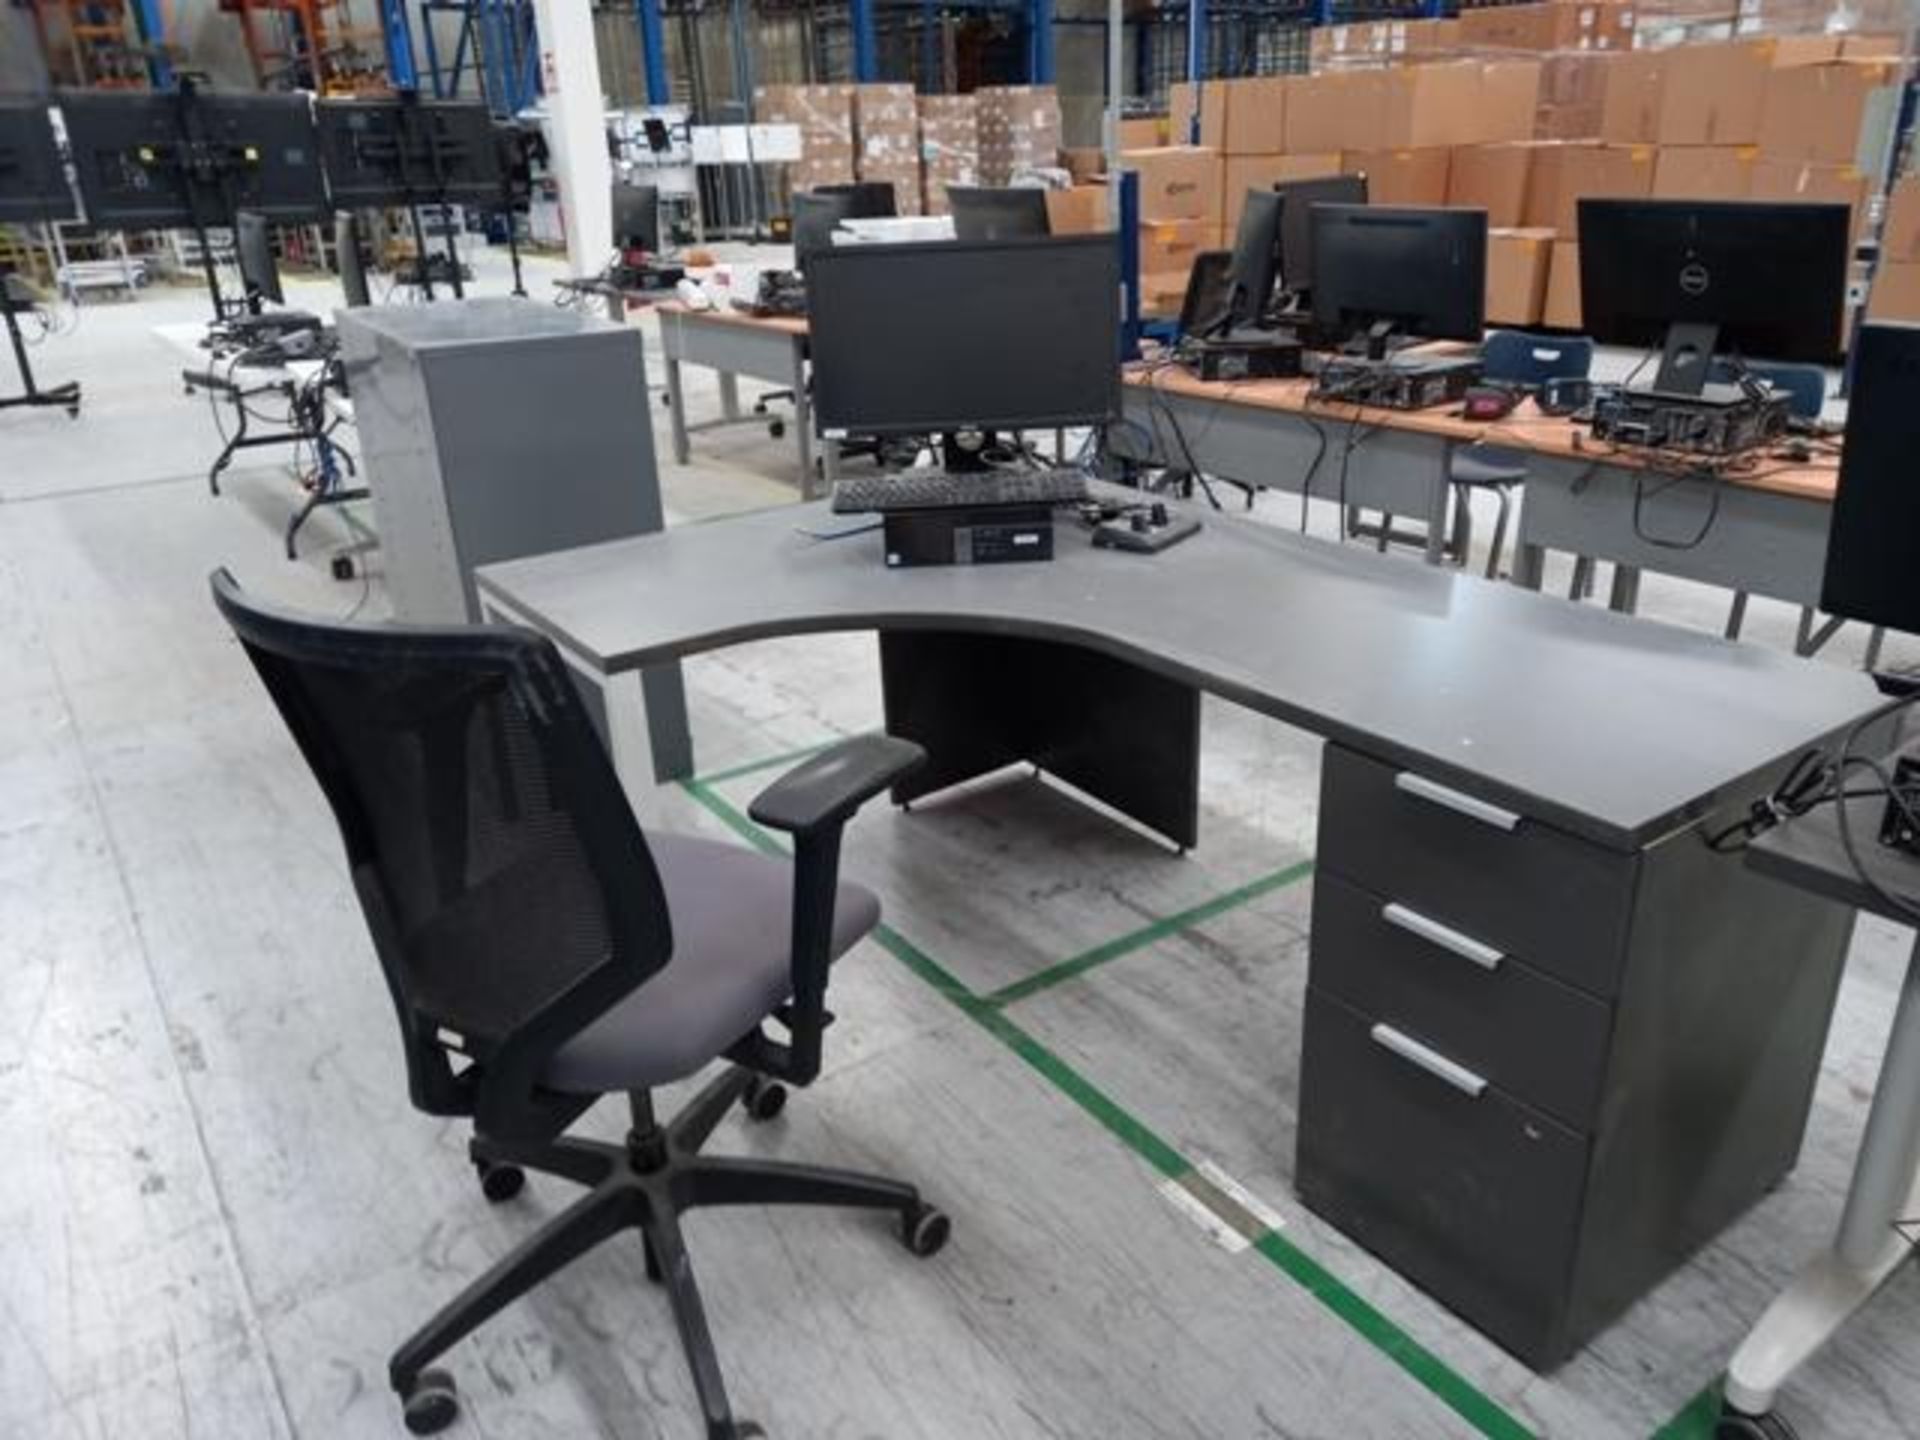 LOT: (66) Of Furniture and Computing Equipment Consisting of: Computers, Printers, Desks, Chairs, Dr - Image 29 of 38